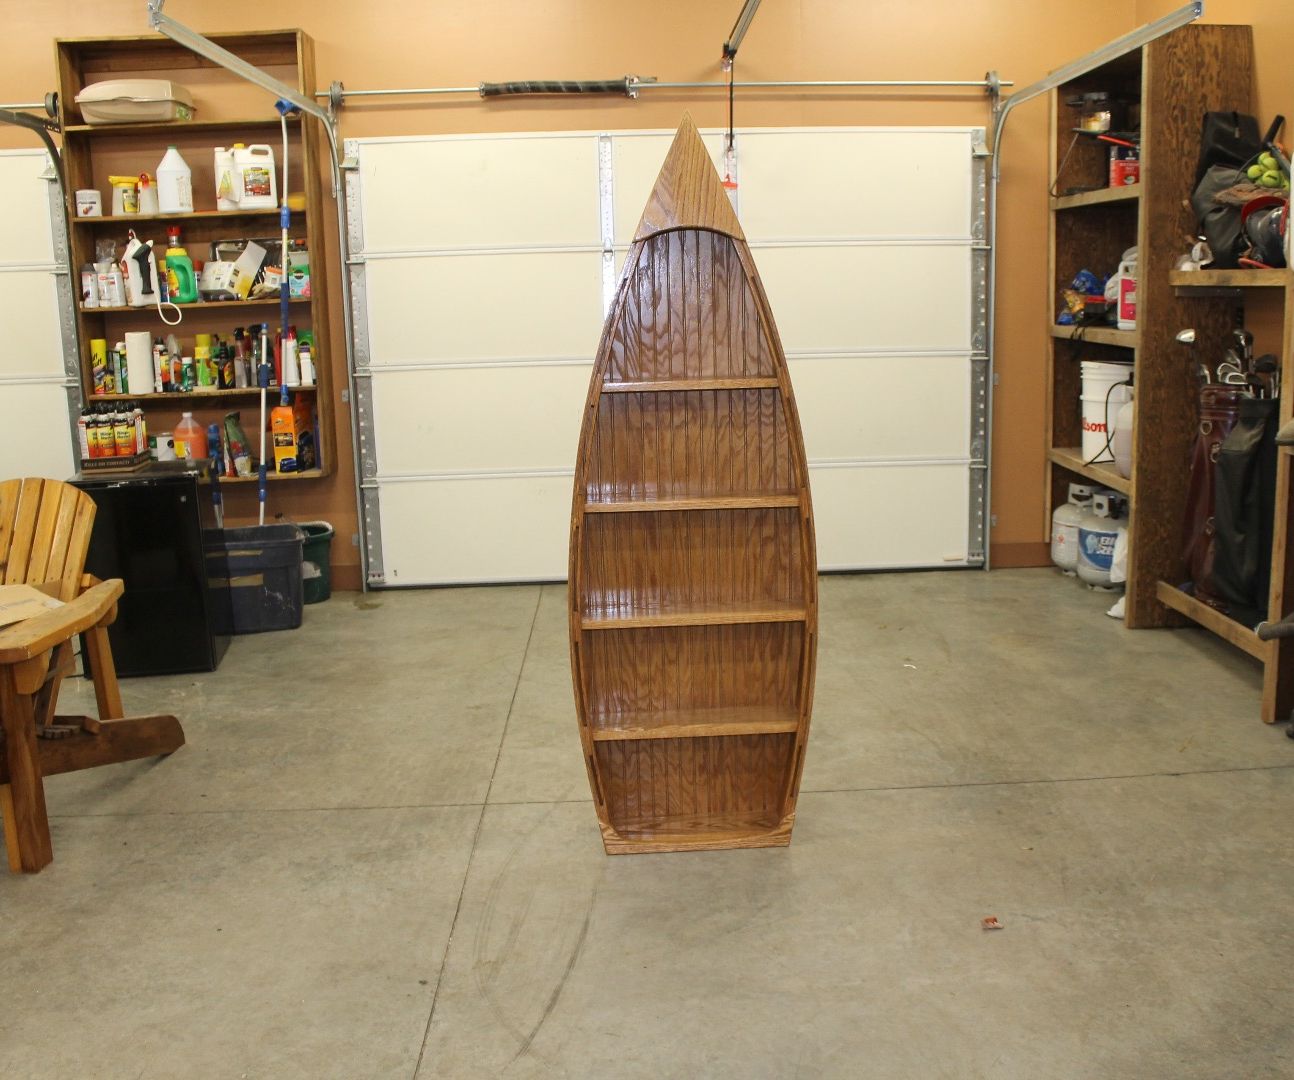 How To Make A Boat With Shelving